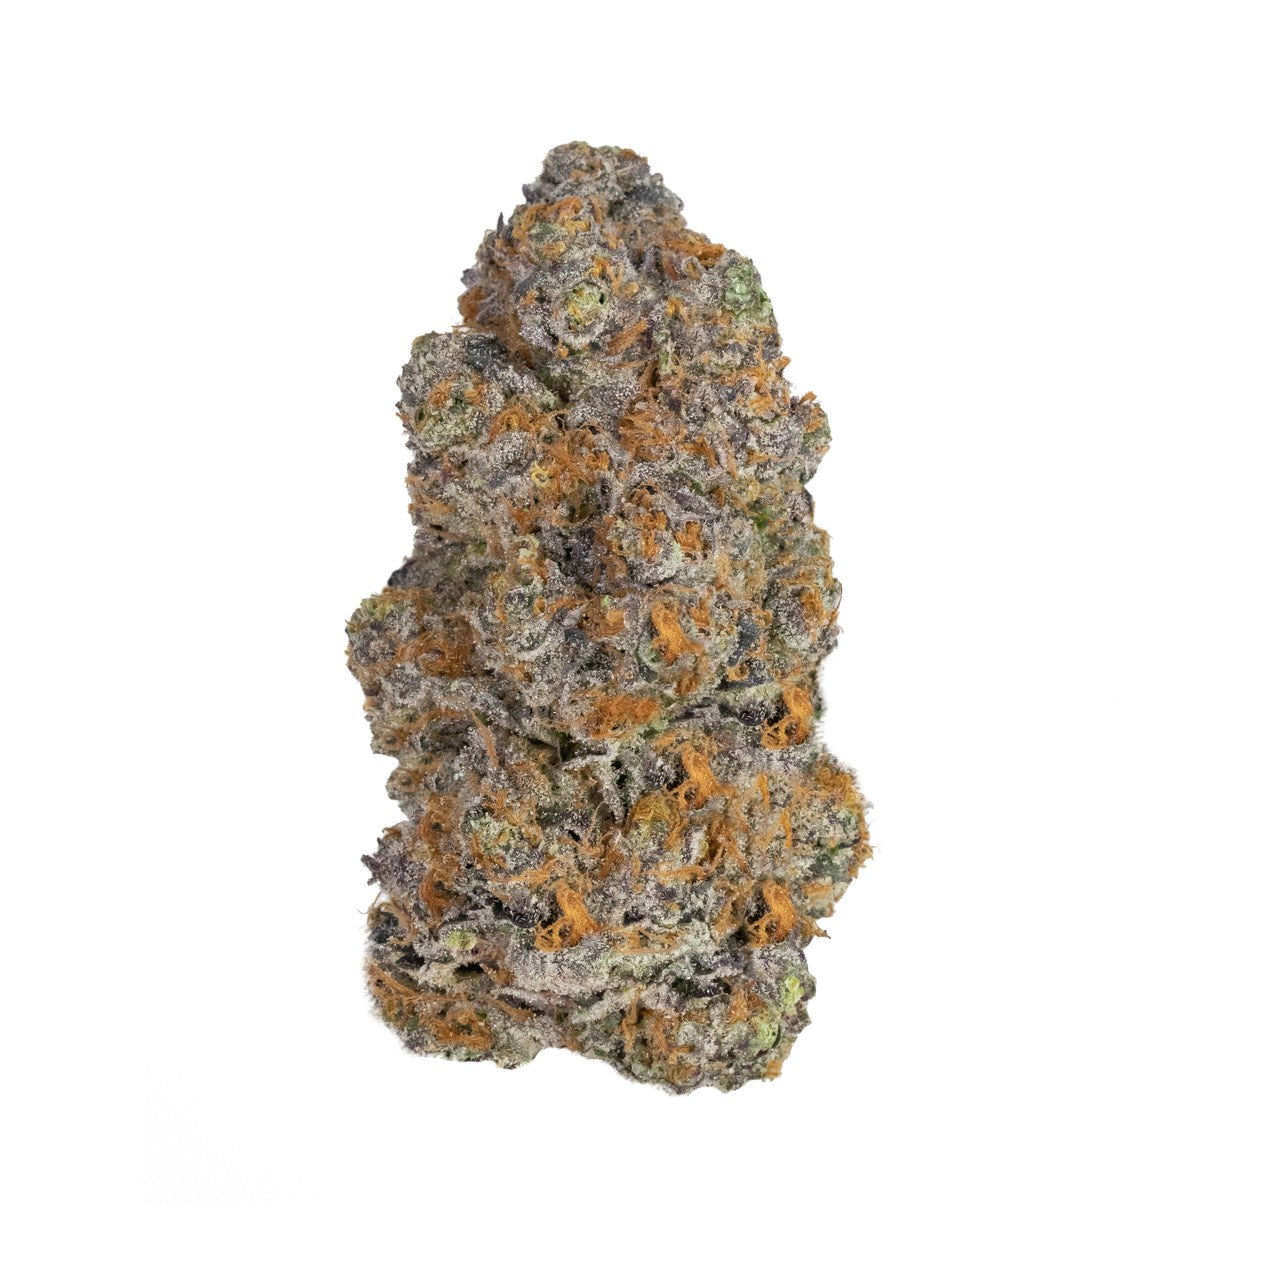 Strain Review: Ice Cream Biscotti by 9 Mile Farm - The Highest Critic